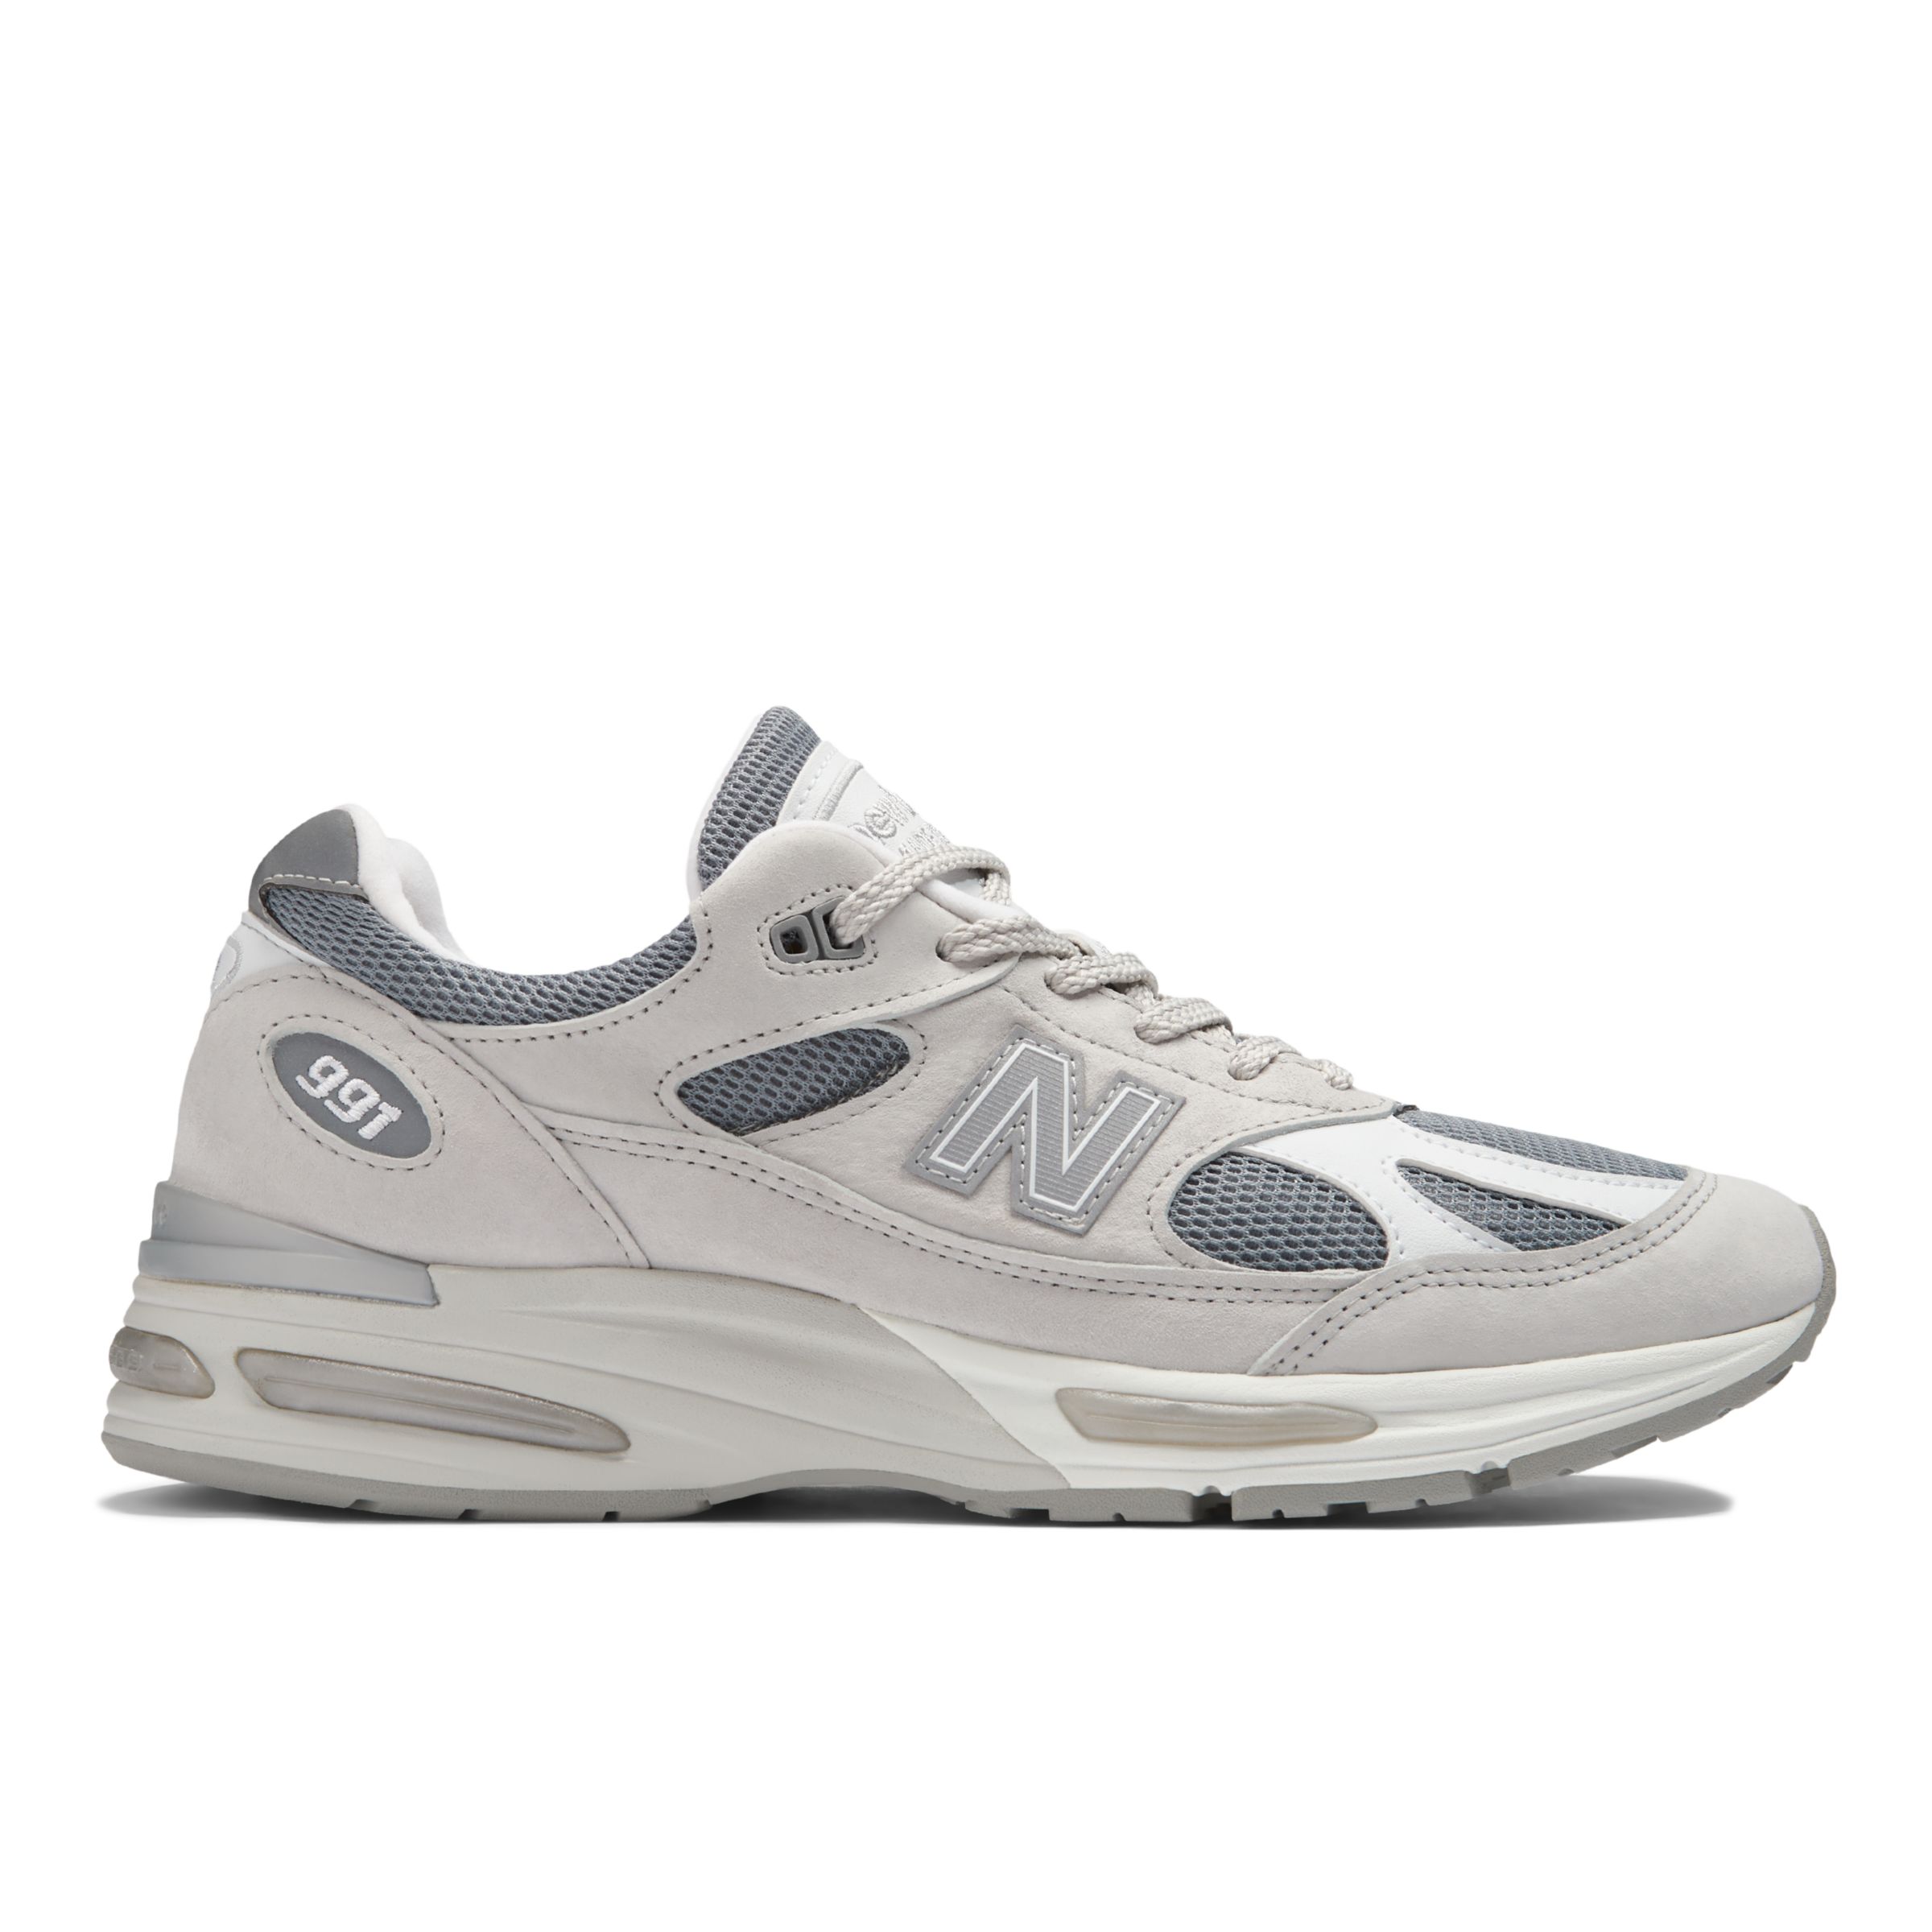 New Balance Unisexe MADE in UK 991v2 en Gris/Blanc, Suede/Mesh, Taille 47.5 Large